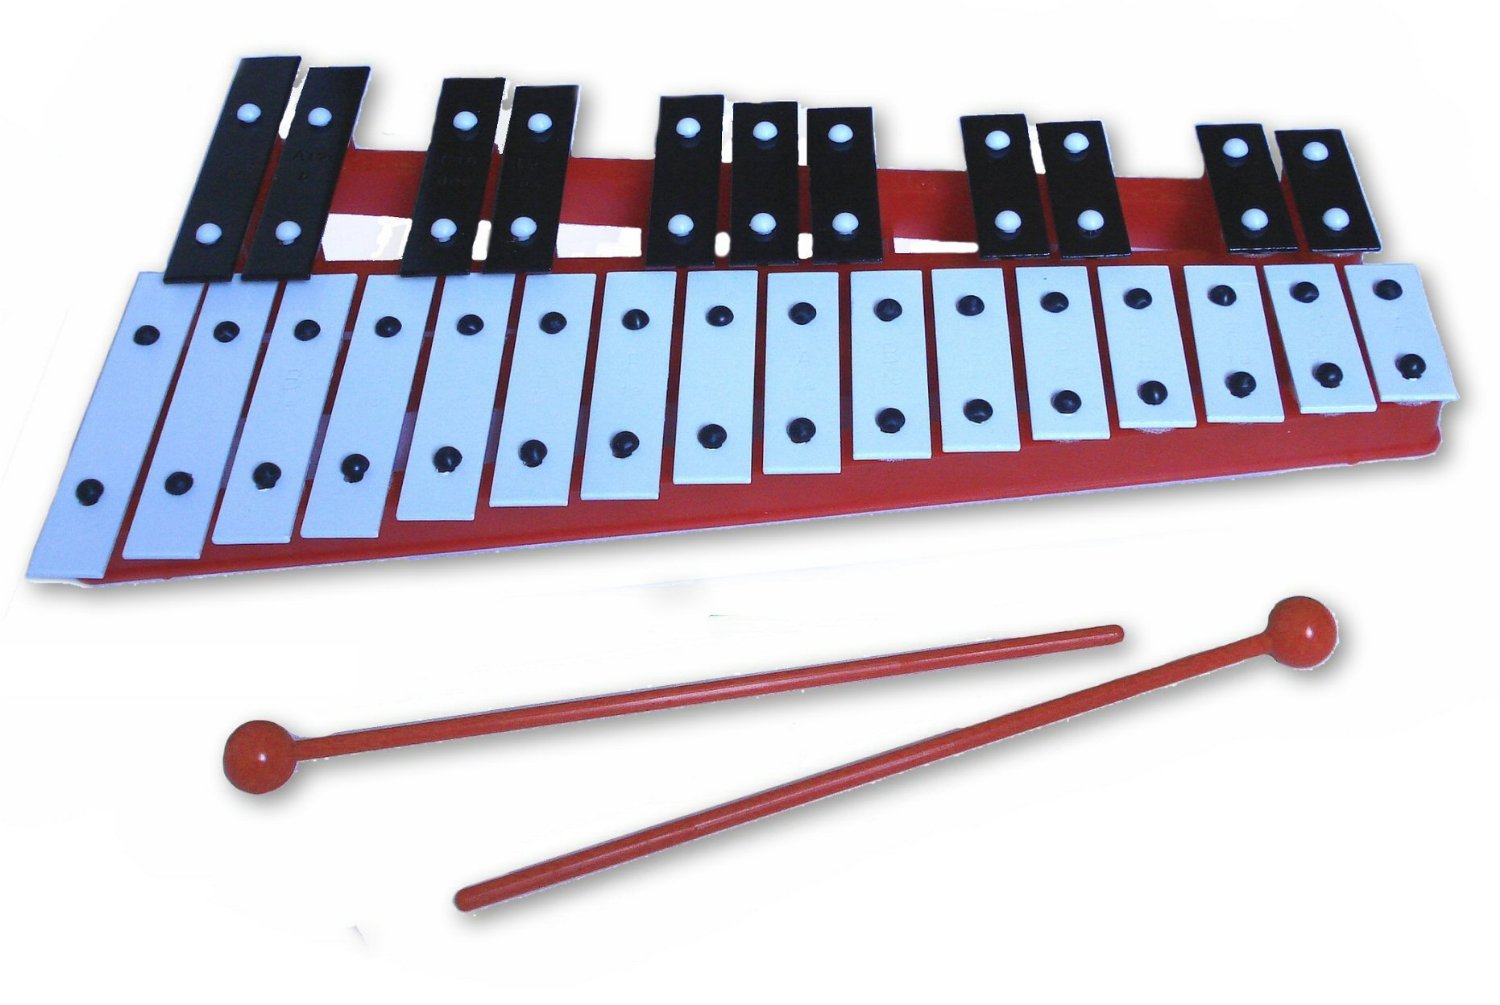 xylophone clipart images - photo #48